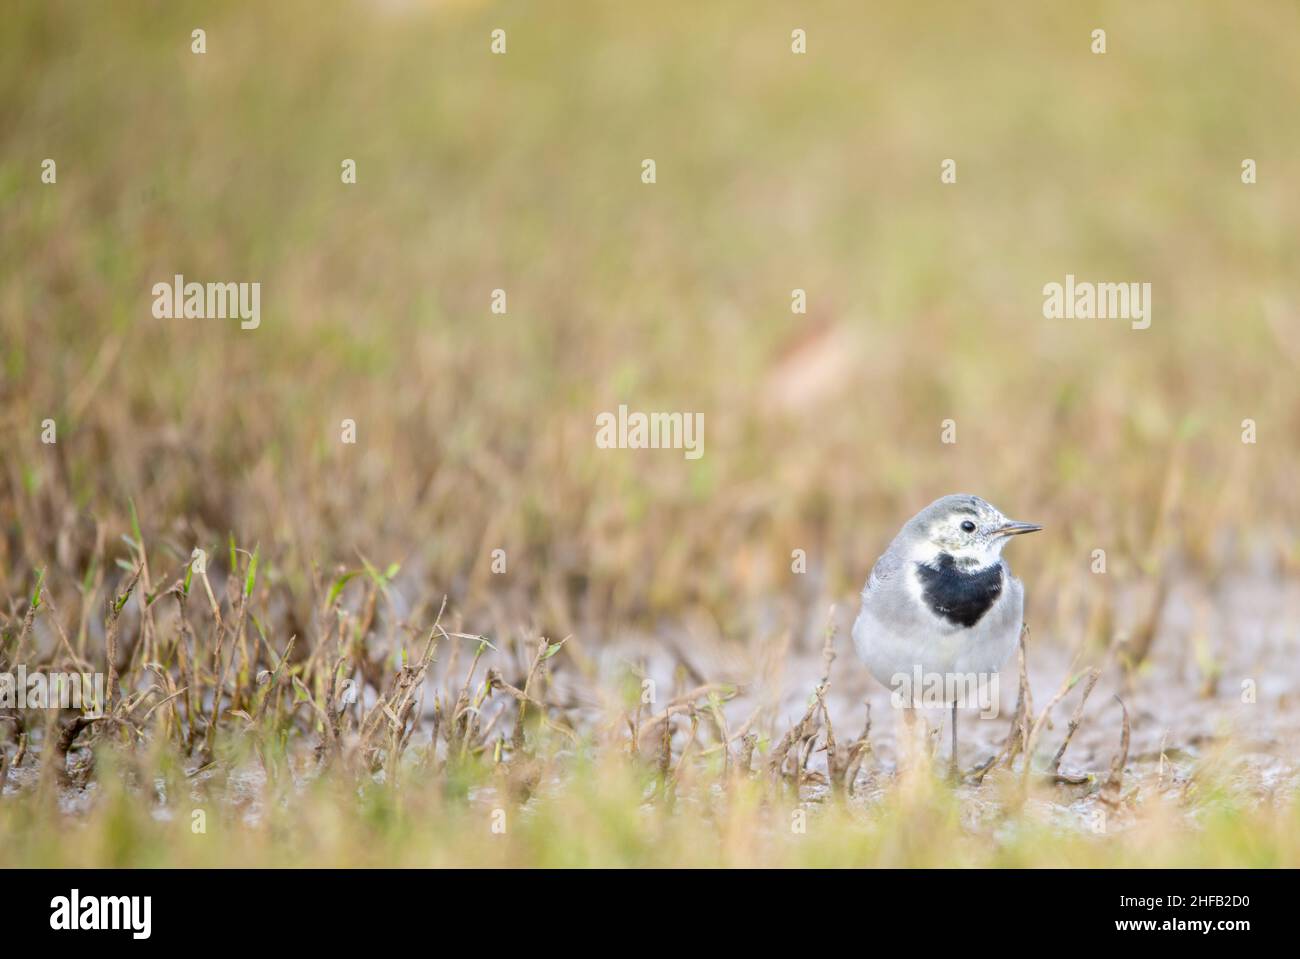 White wagtail looking for food, Photographed from ground level Stock Photo